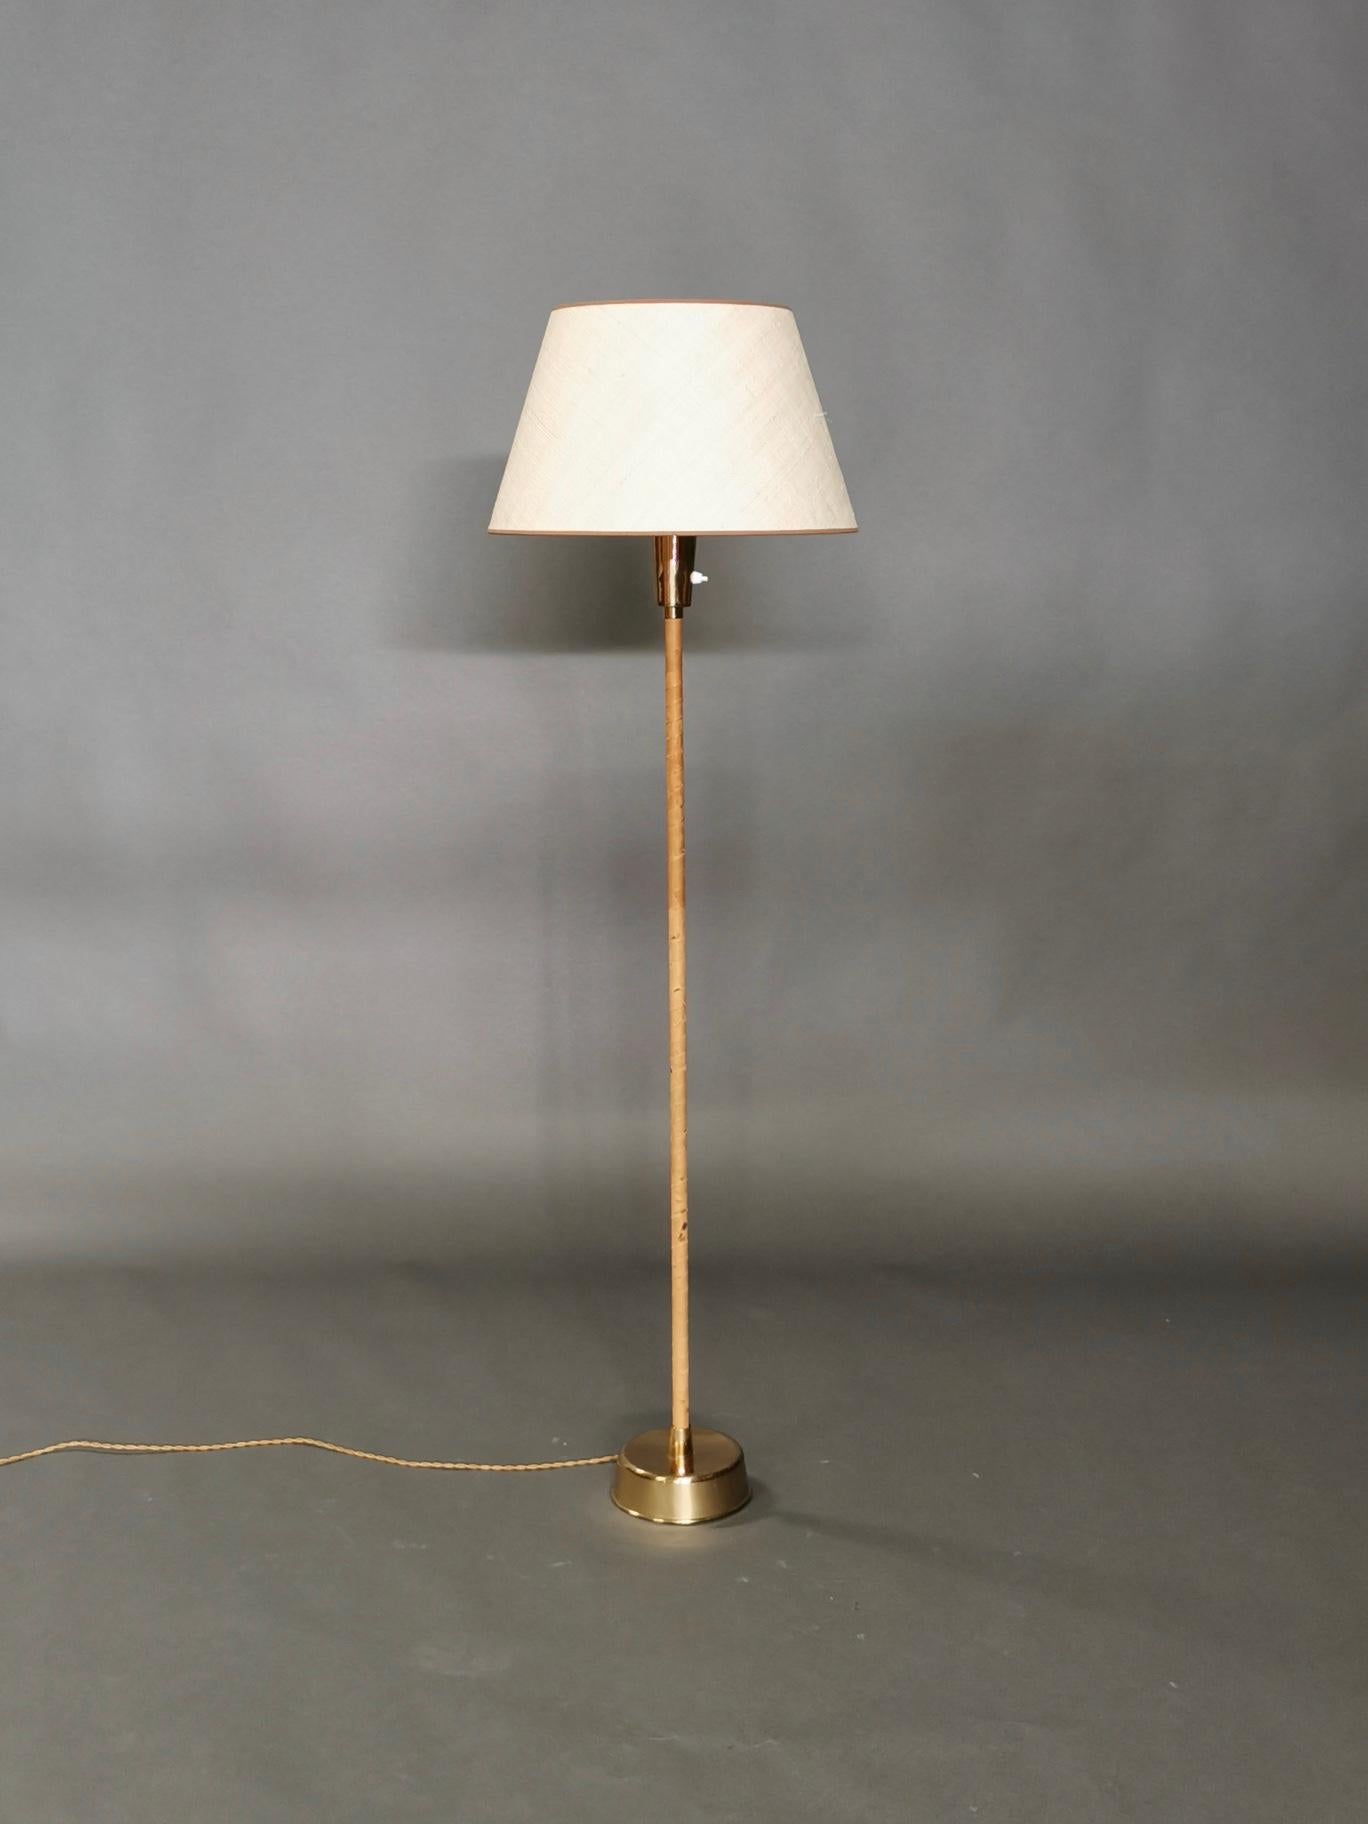 Lisa Johansson-Pape, floor lamp manufactured by Orno in Finland in the 1940s.
Brass base and natural leather covered pole.
Handmade raffia shade with natural brown trimming.
Excellent condition.